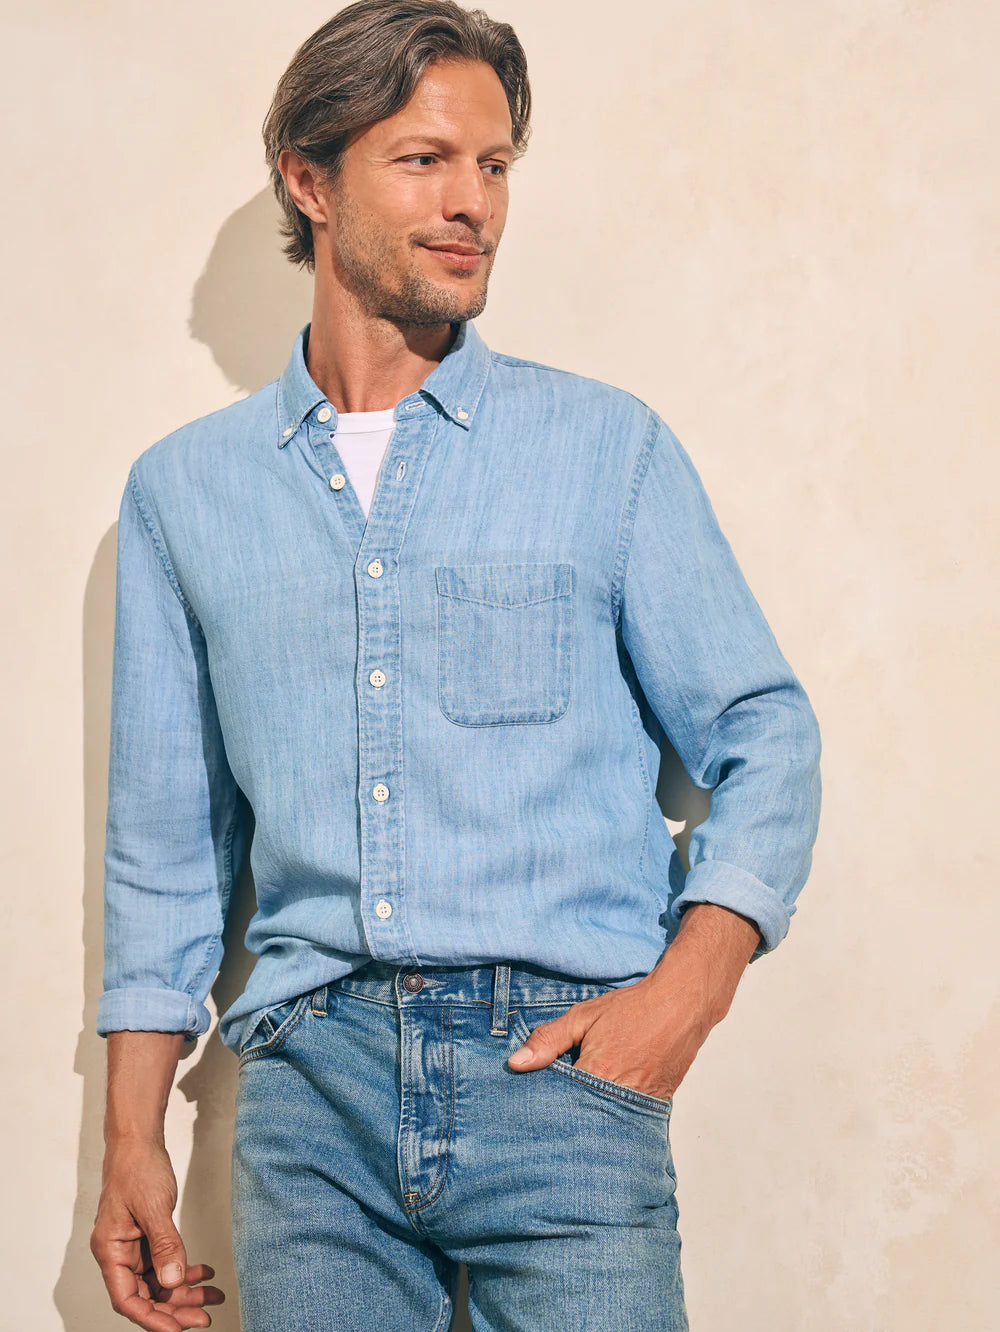 The Tried & True Chambray Shirt